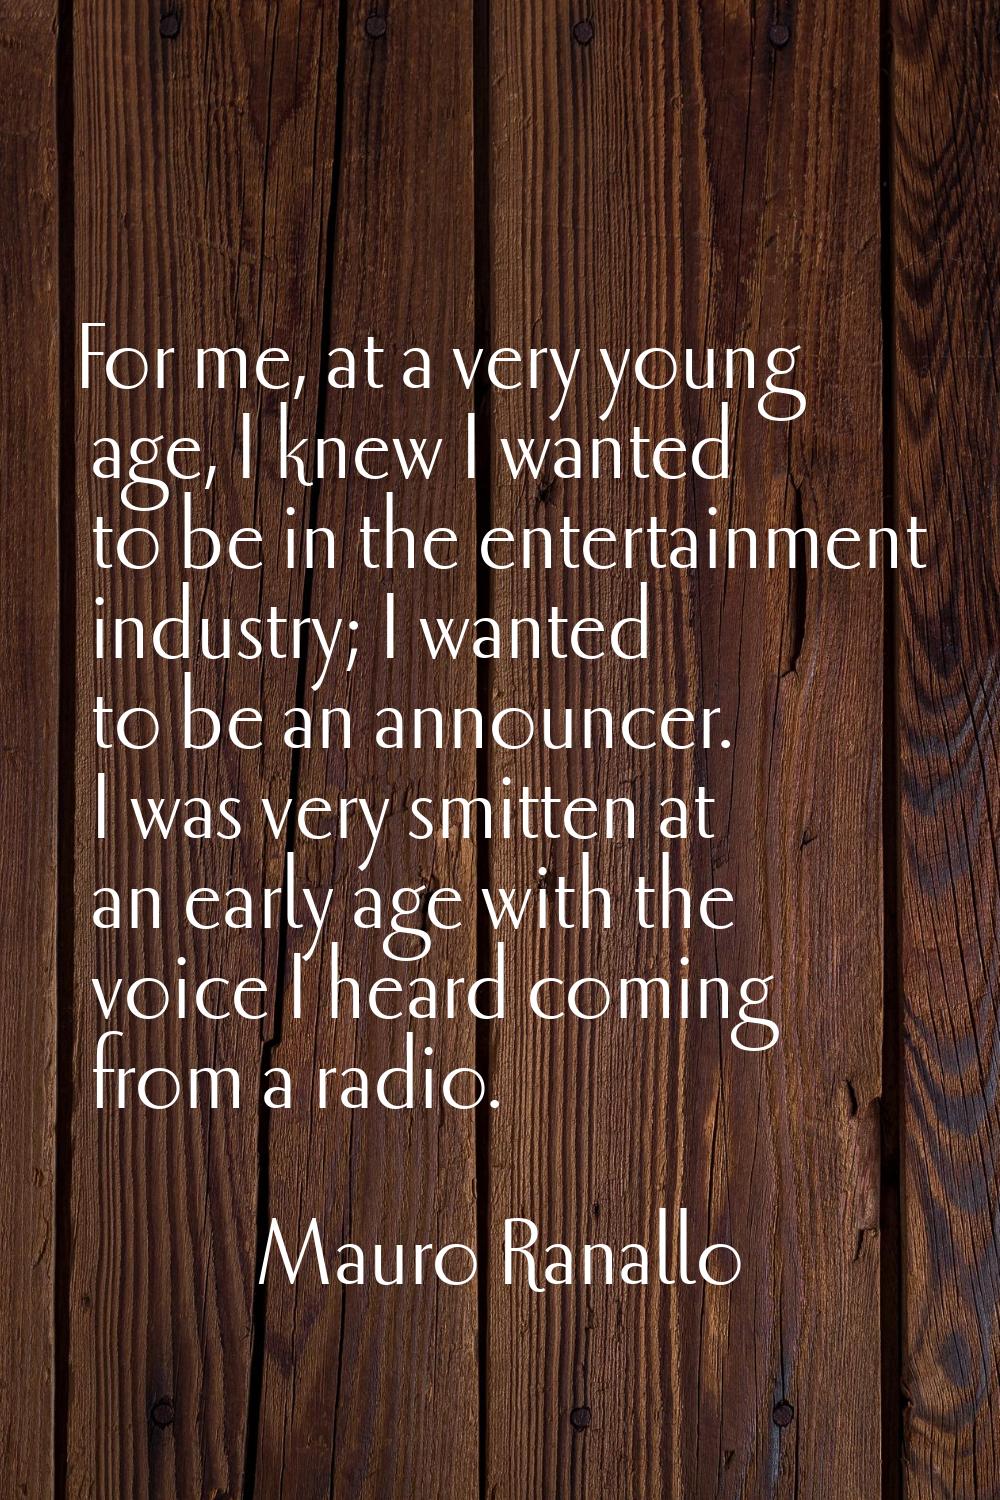 For me, at a very young age, I knew I wanted to be in the entertainment industry; I wanted to be an